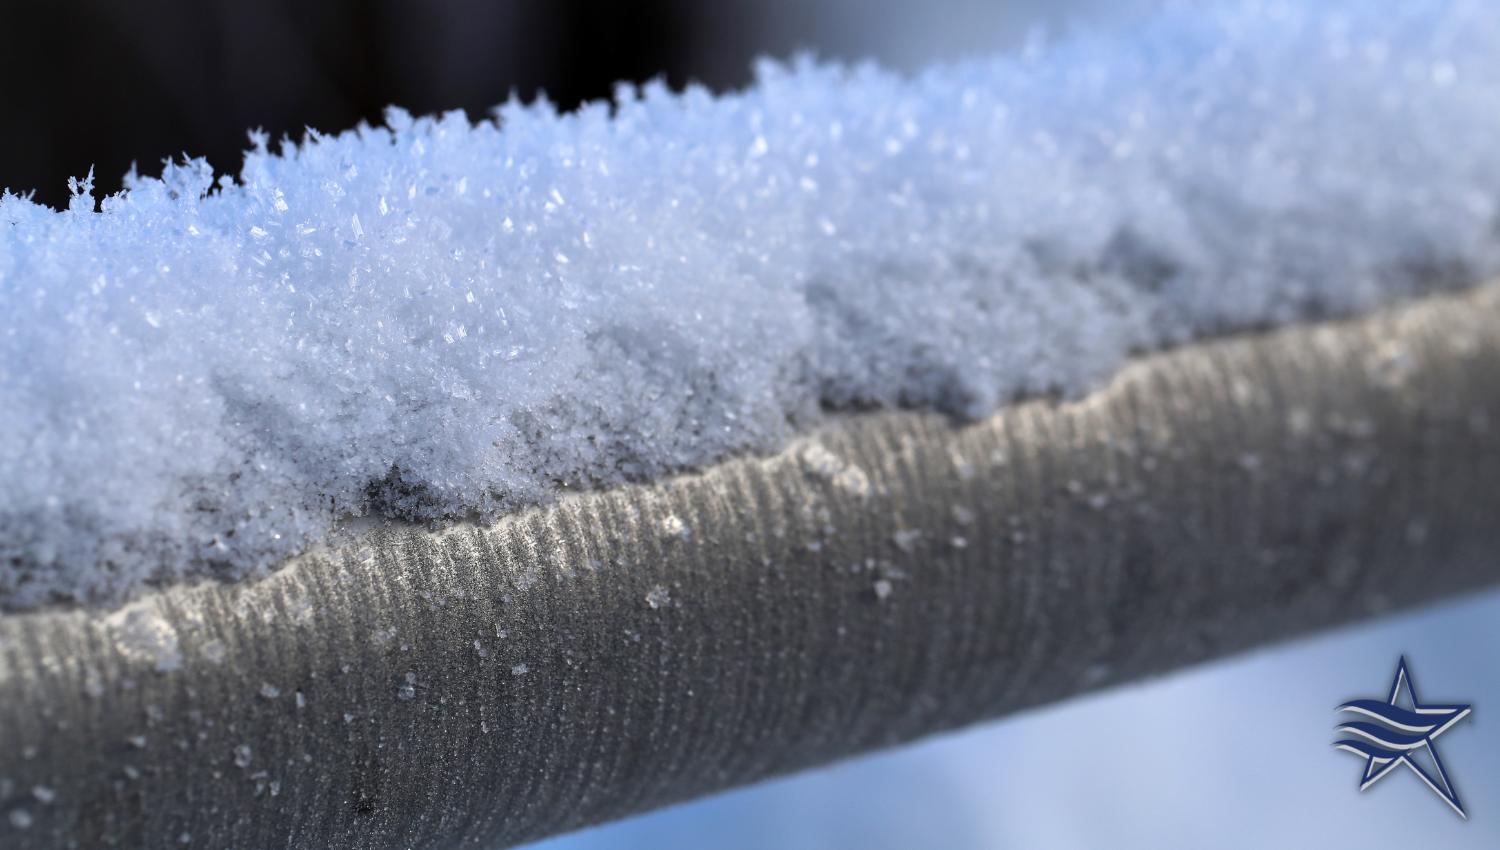 How To Insulate Outdoor Water Pipes from Freezing